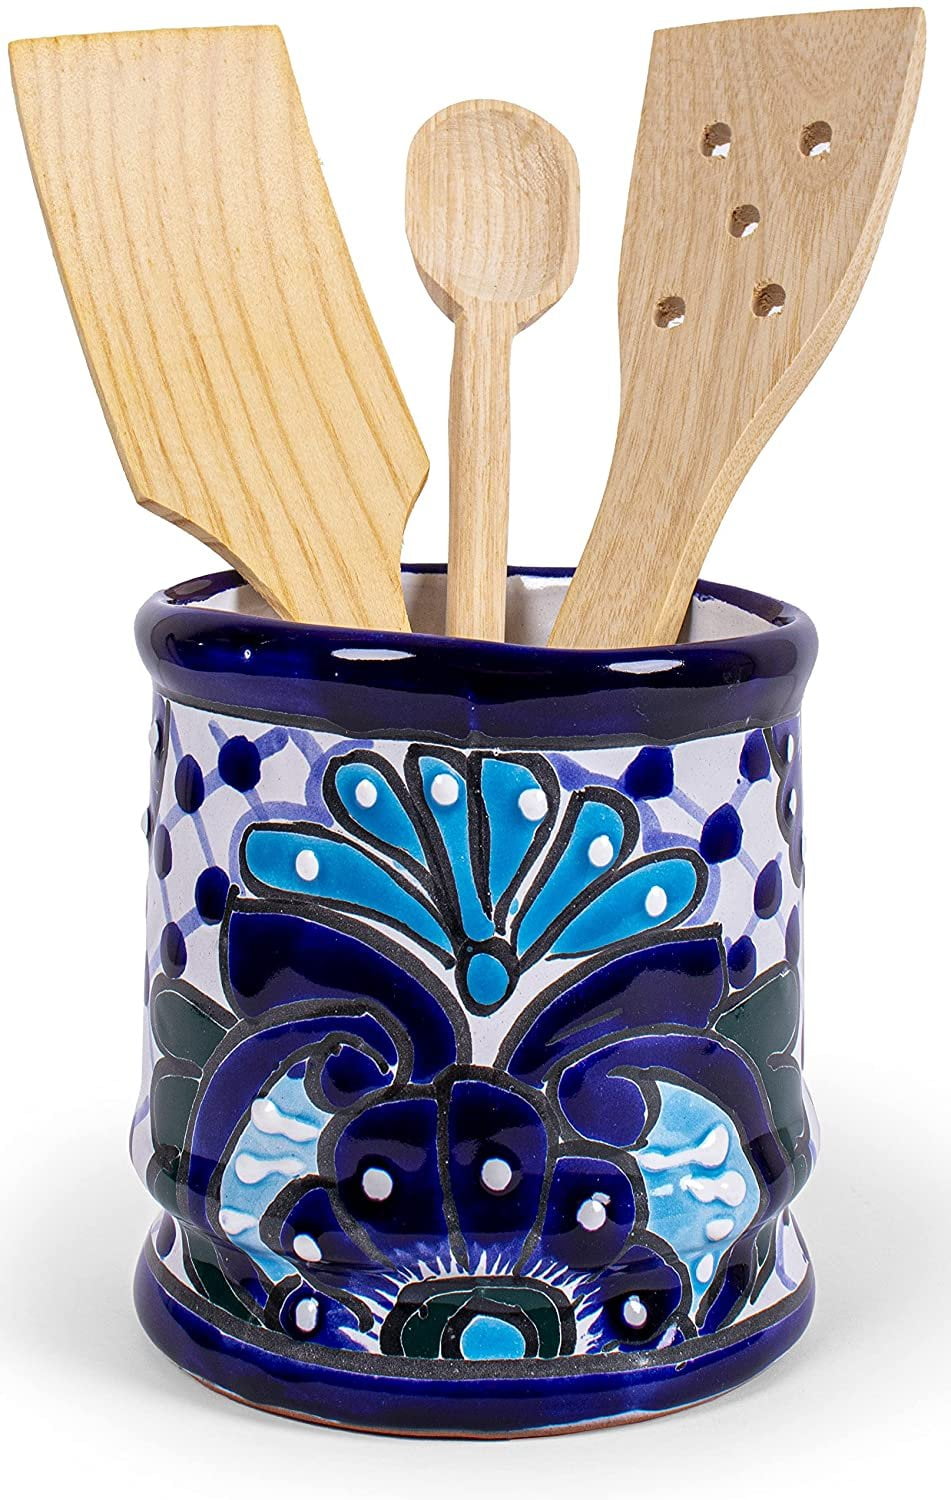 Custom Midnight Blue And Tan Kitchen Utensil Holder by Tulane Road Pottery